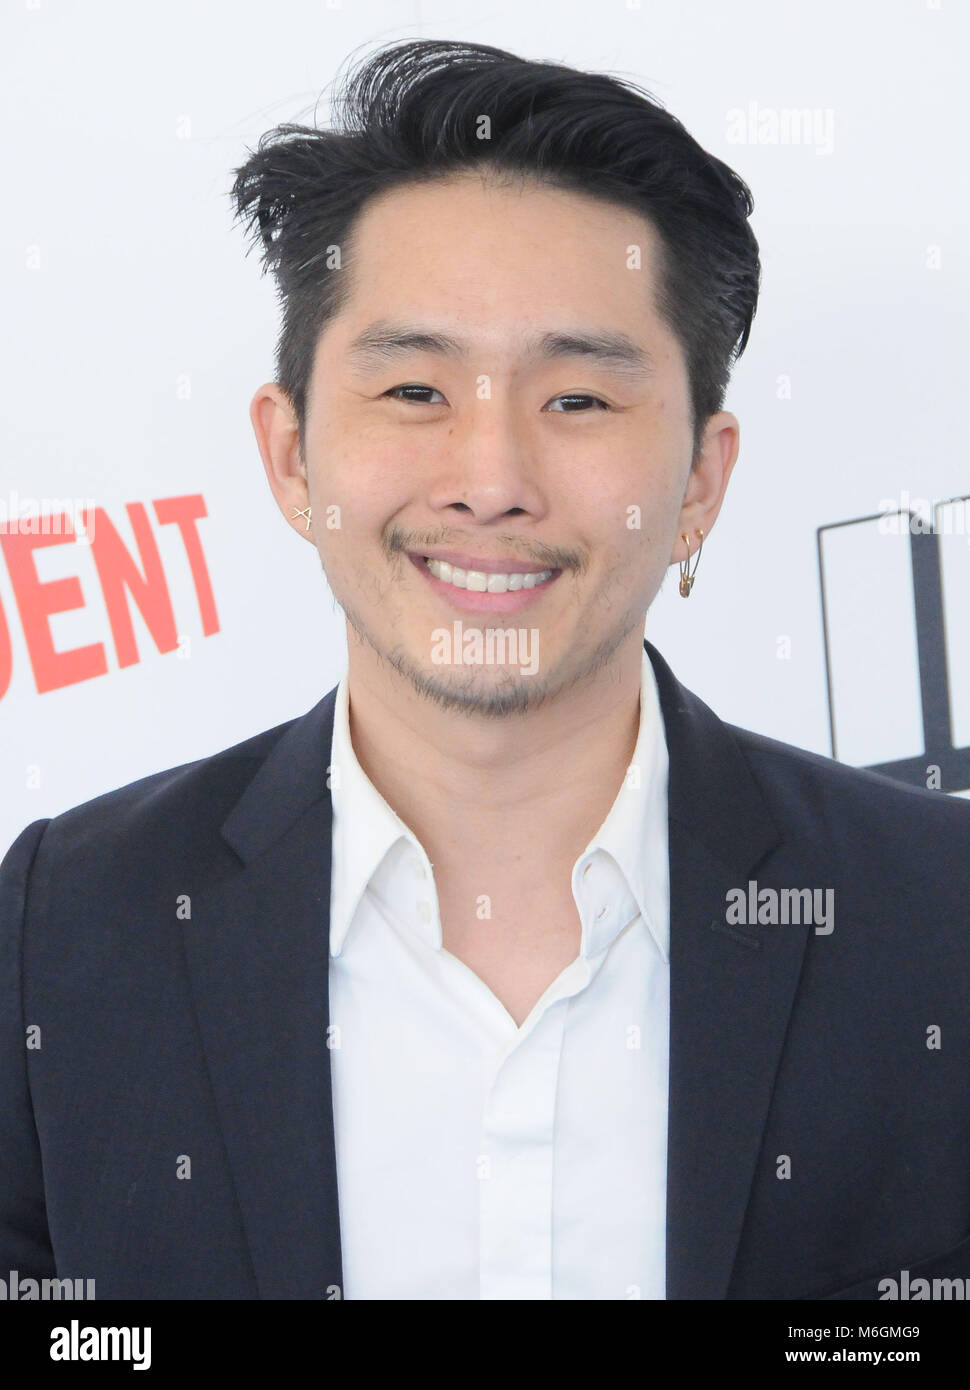 SANTA MONICA, CA - MARCH 03: Director Justin Chon attends the 2018 Film Independent Spirit Awards on March 3, 2018 in Santa Monica, California Photo by Barry King/Alamy Live News Stock Photo